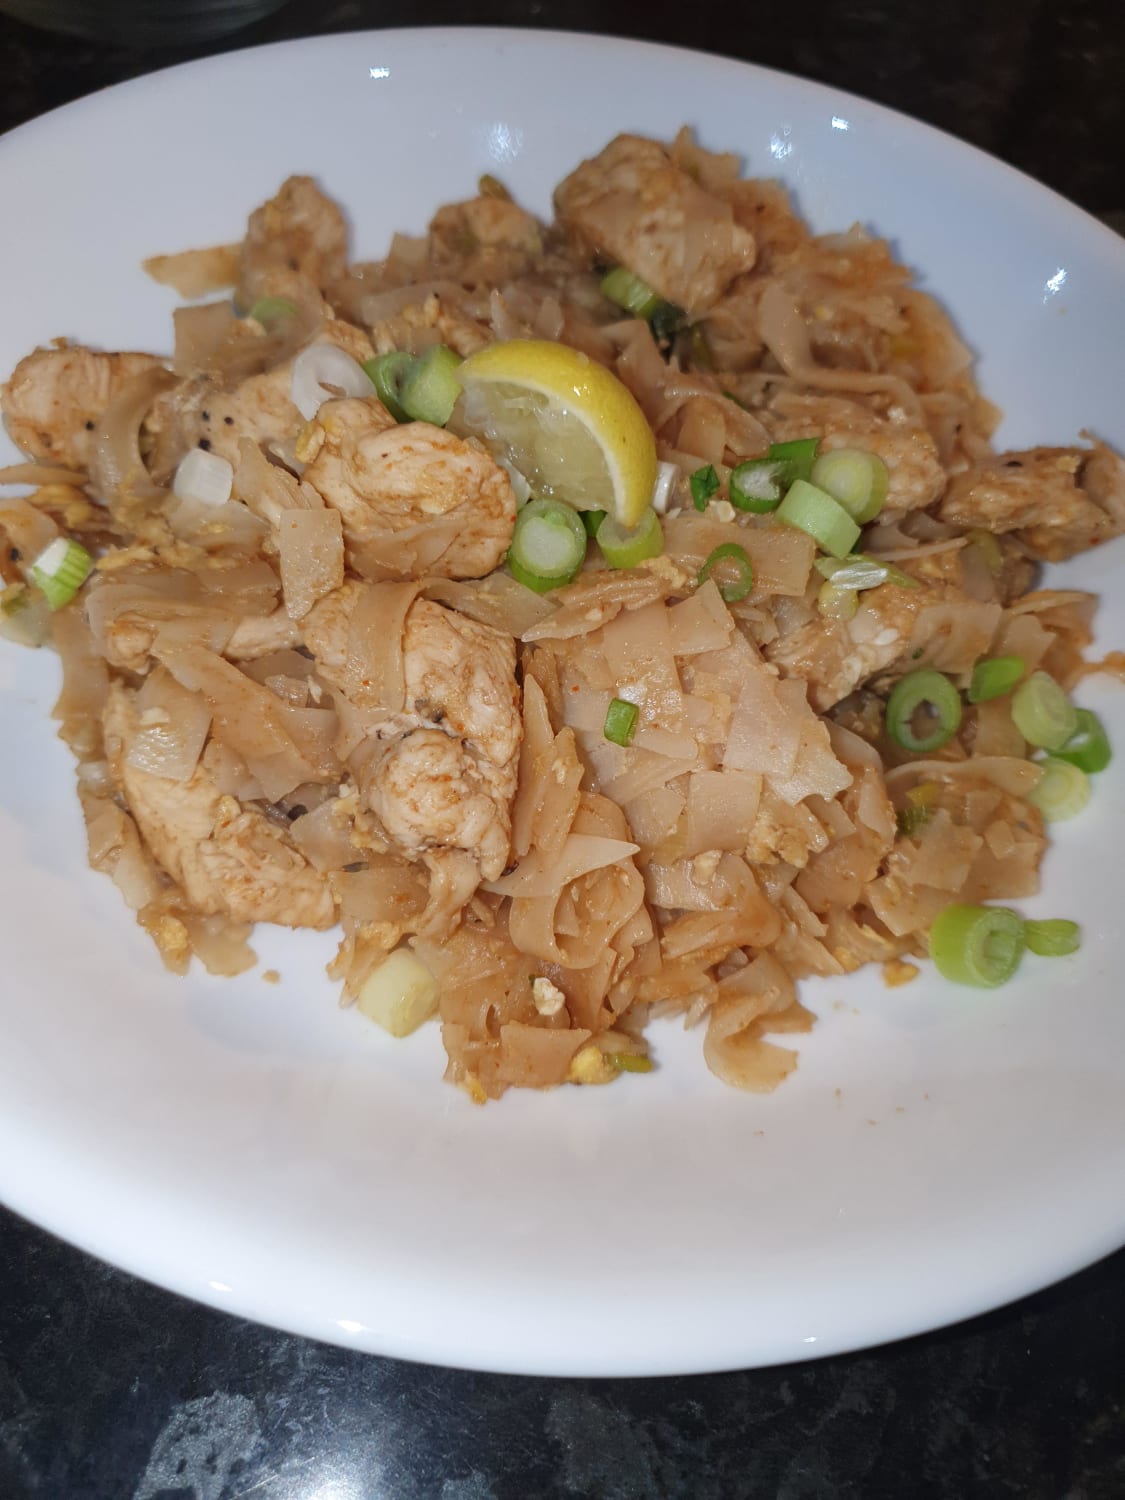 Chicken Pad Thai - learnt this recipe from a cooking school in Thailand